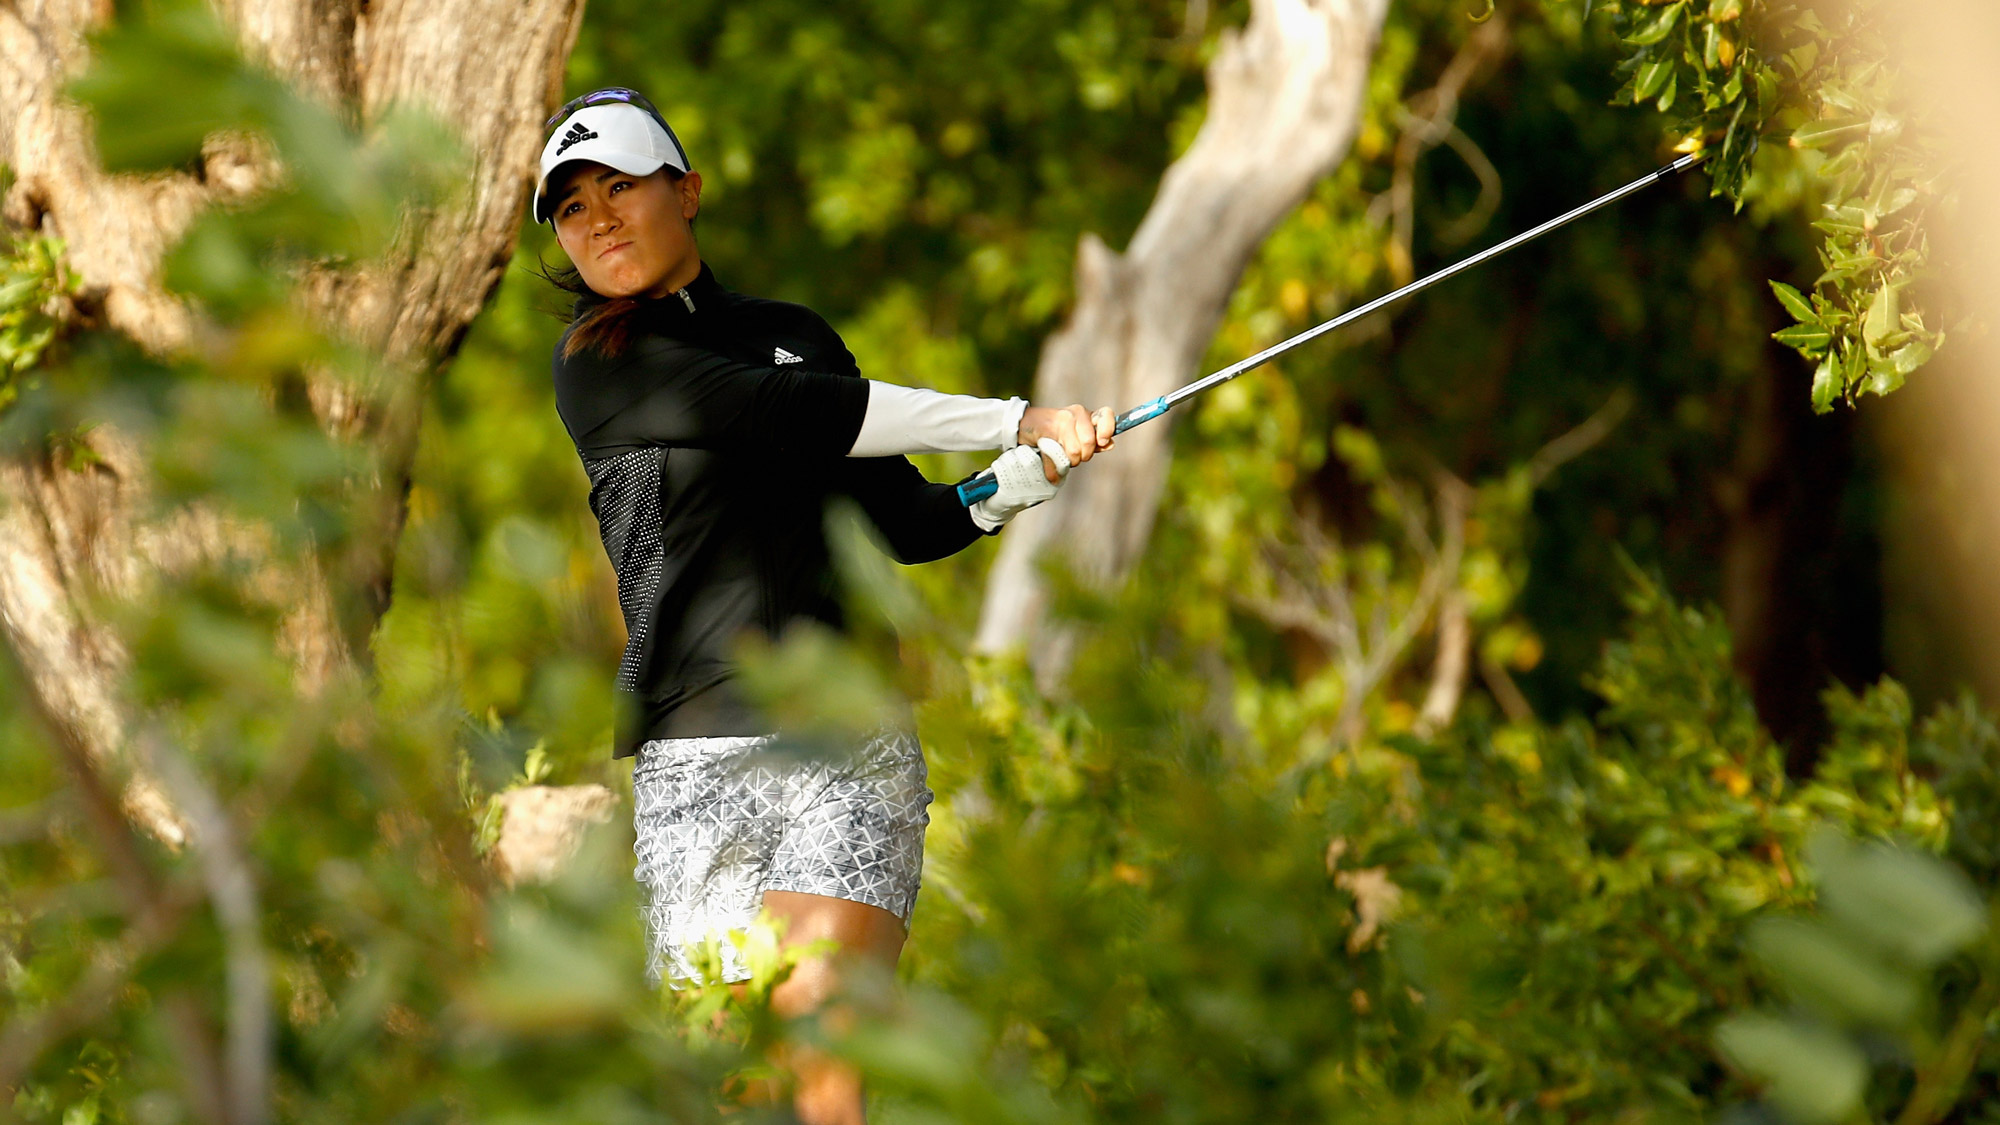 Danielle Kang hits her second shot on the first hole during the second round of the Pure Silk Bahamas LPGA Classic